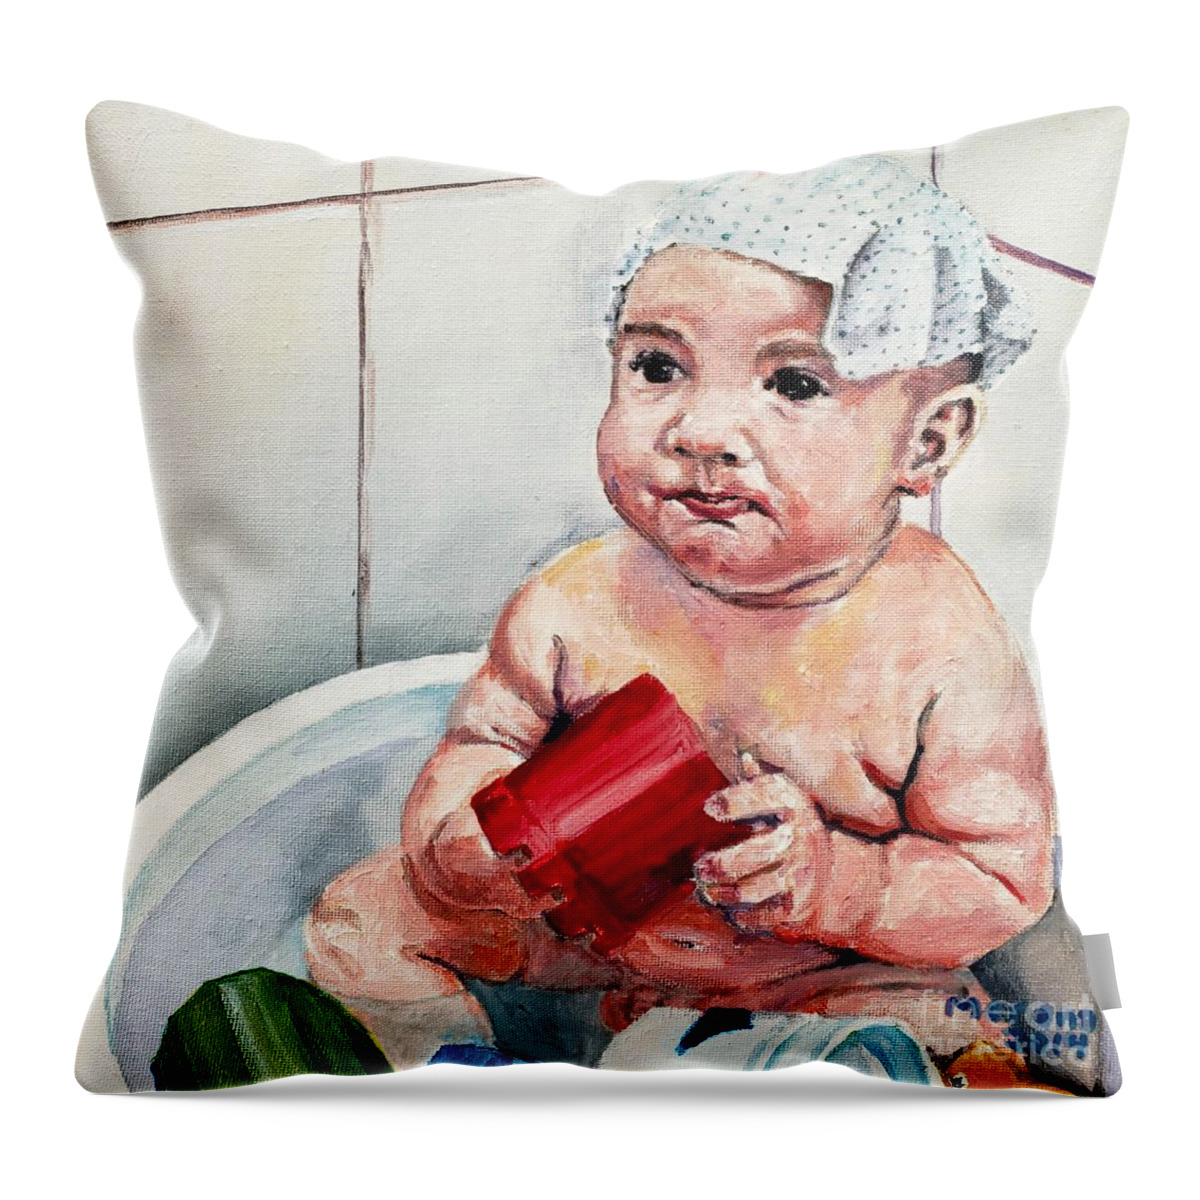 Tub Throw Pillow featuring the painting Too Small Tub by Merana Cadorette